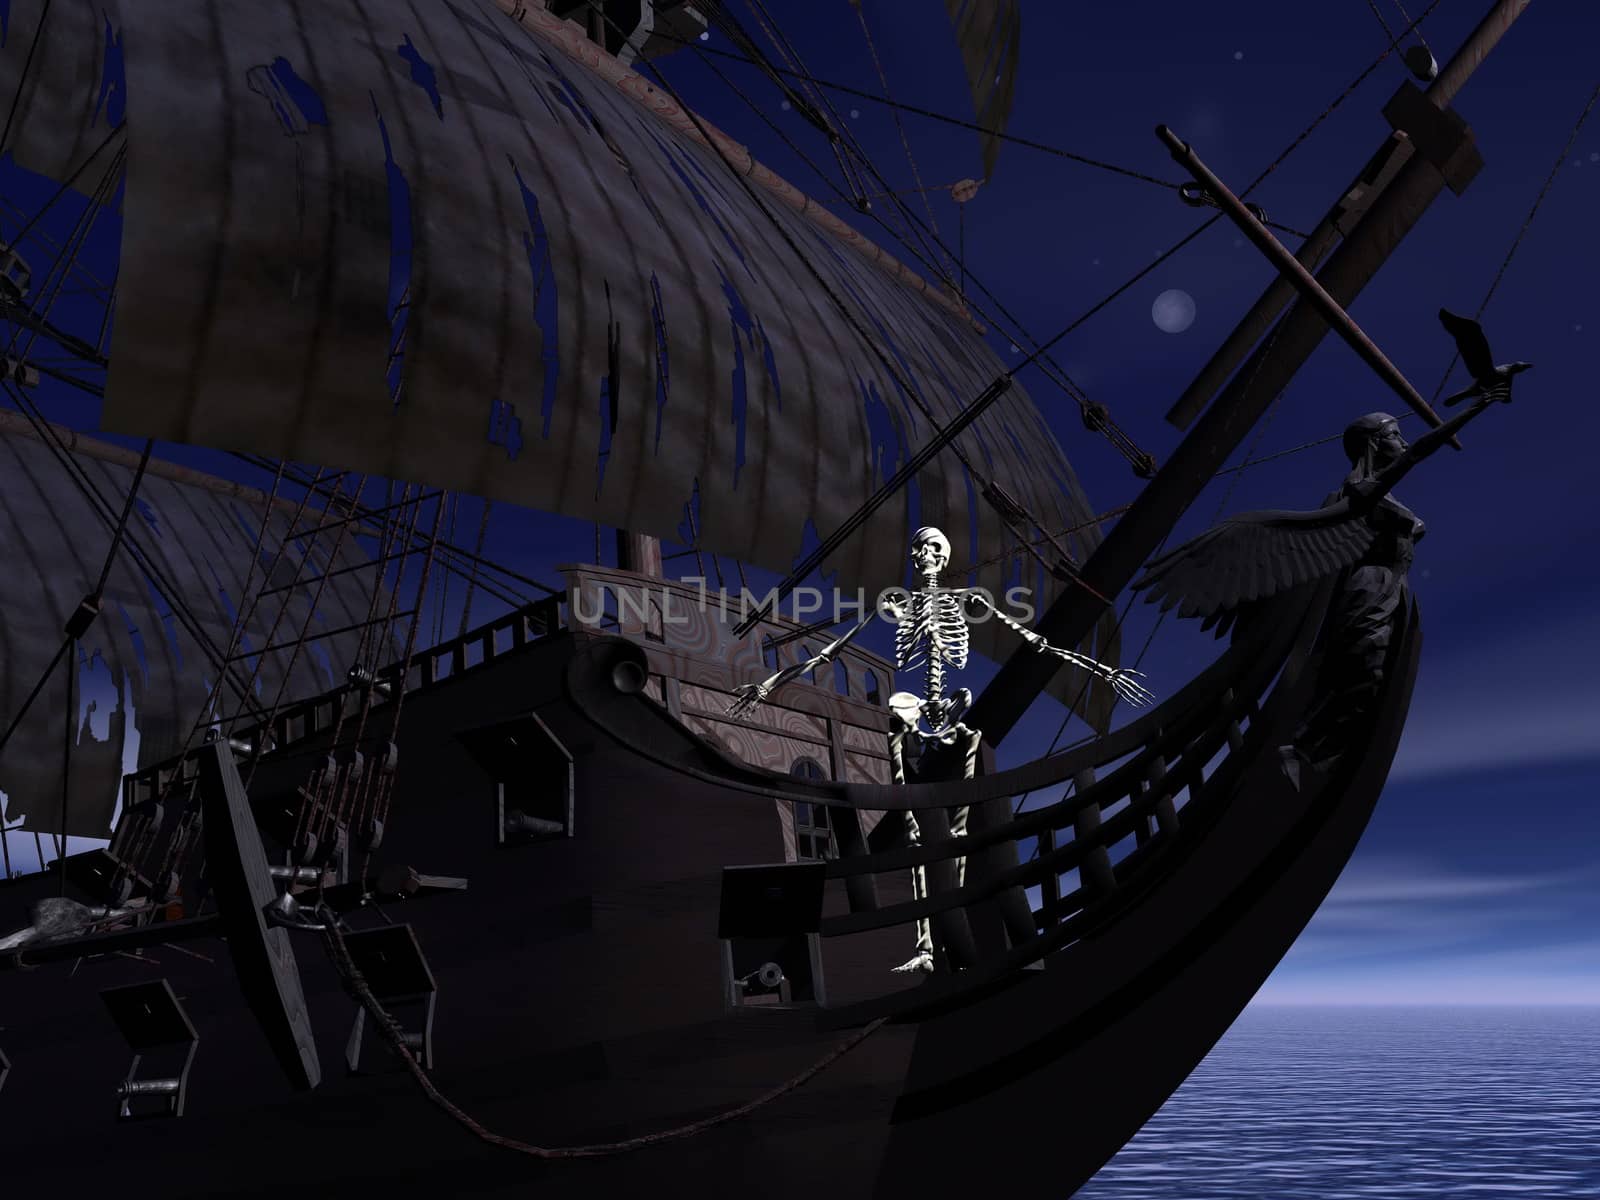 Captain skeleton at the front of a ghost boat by night time